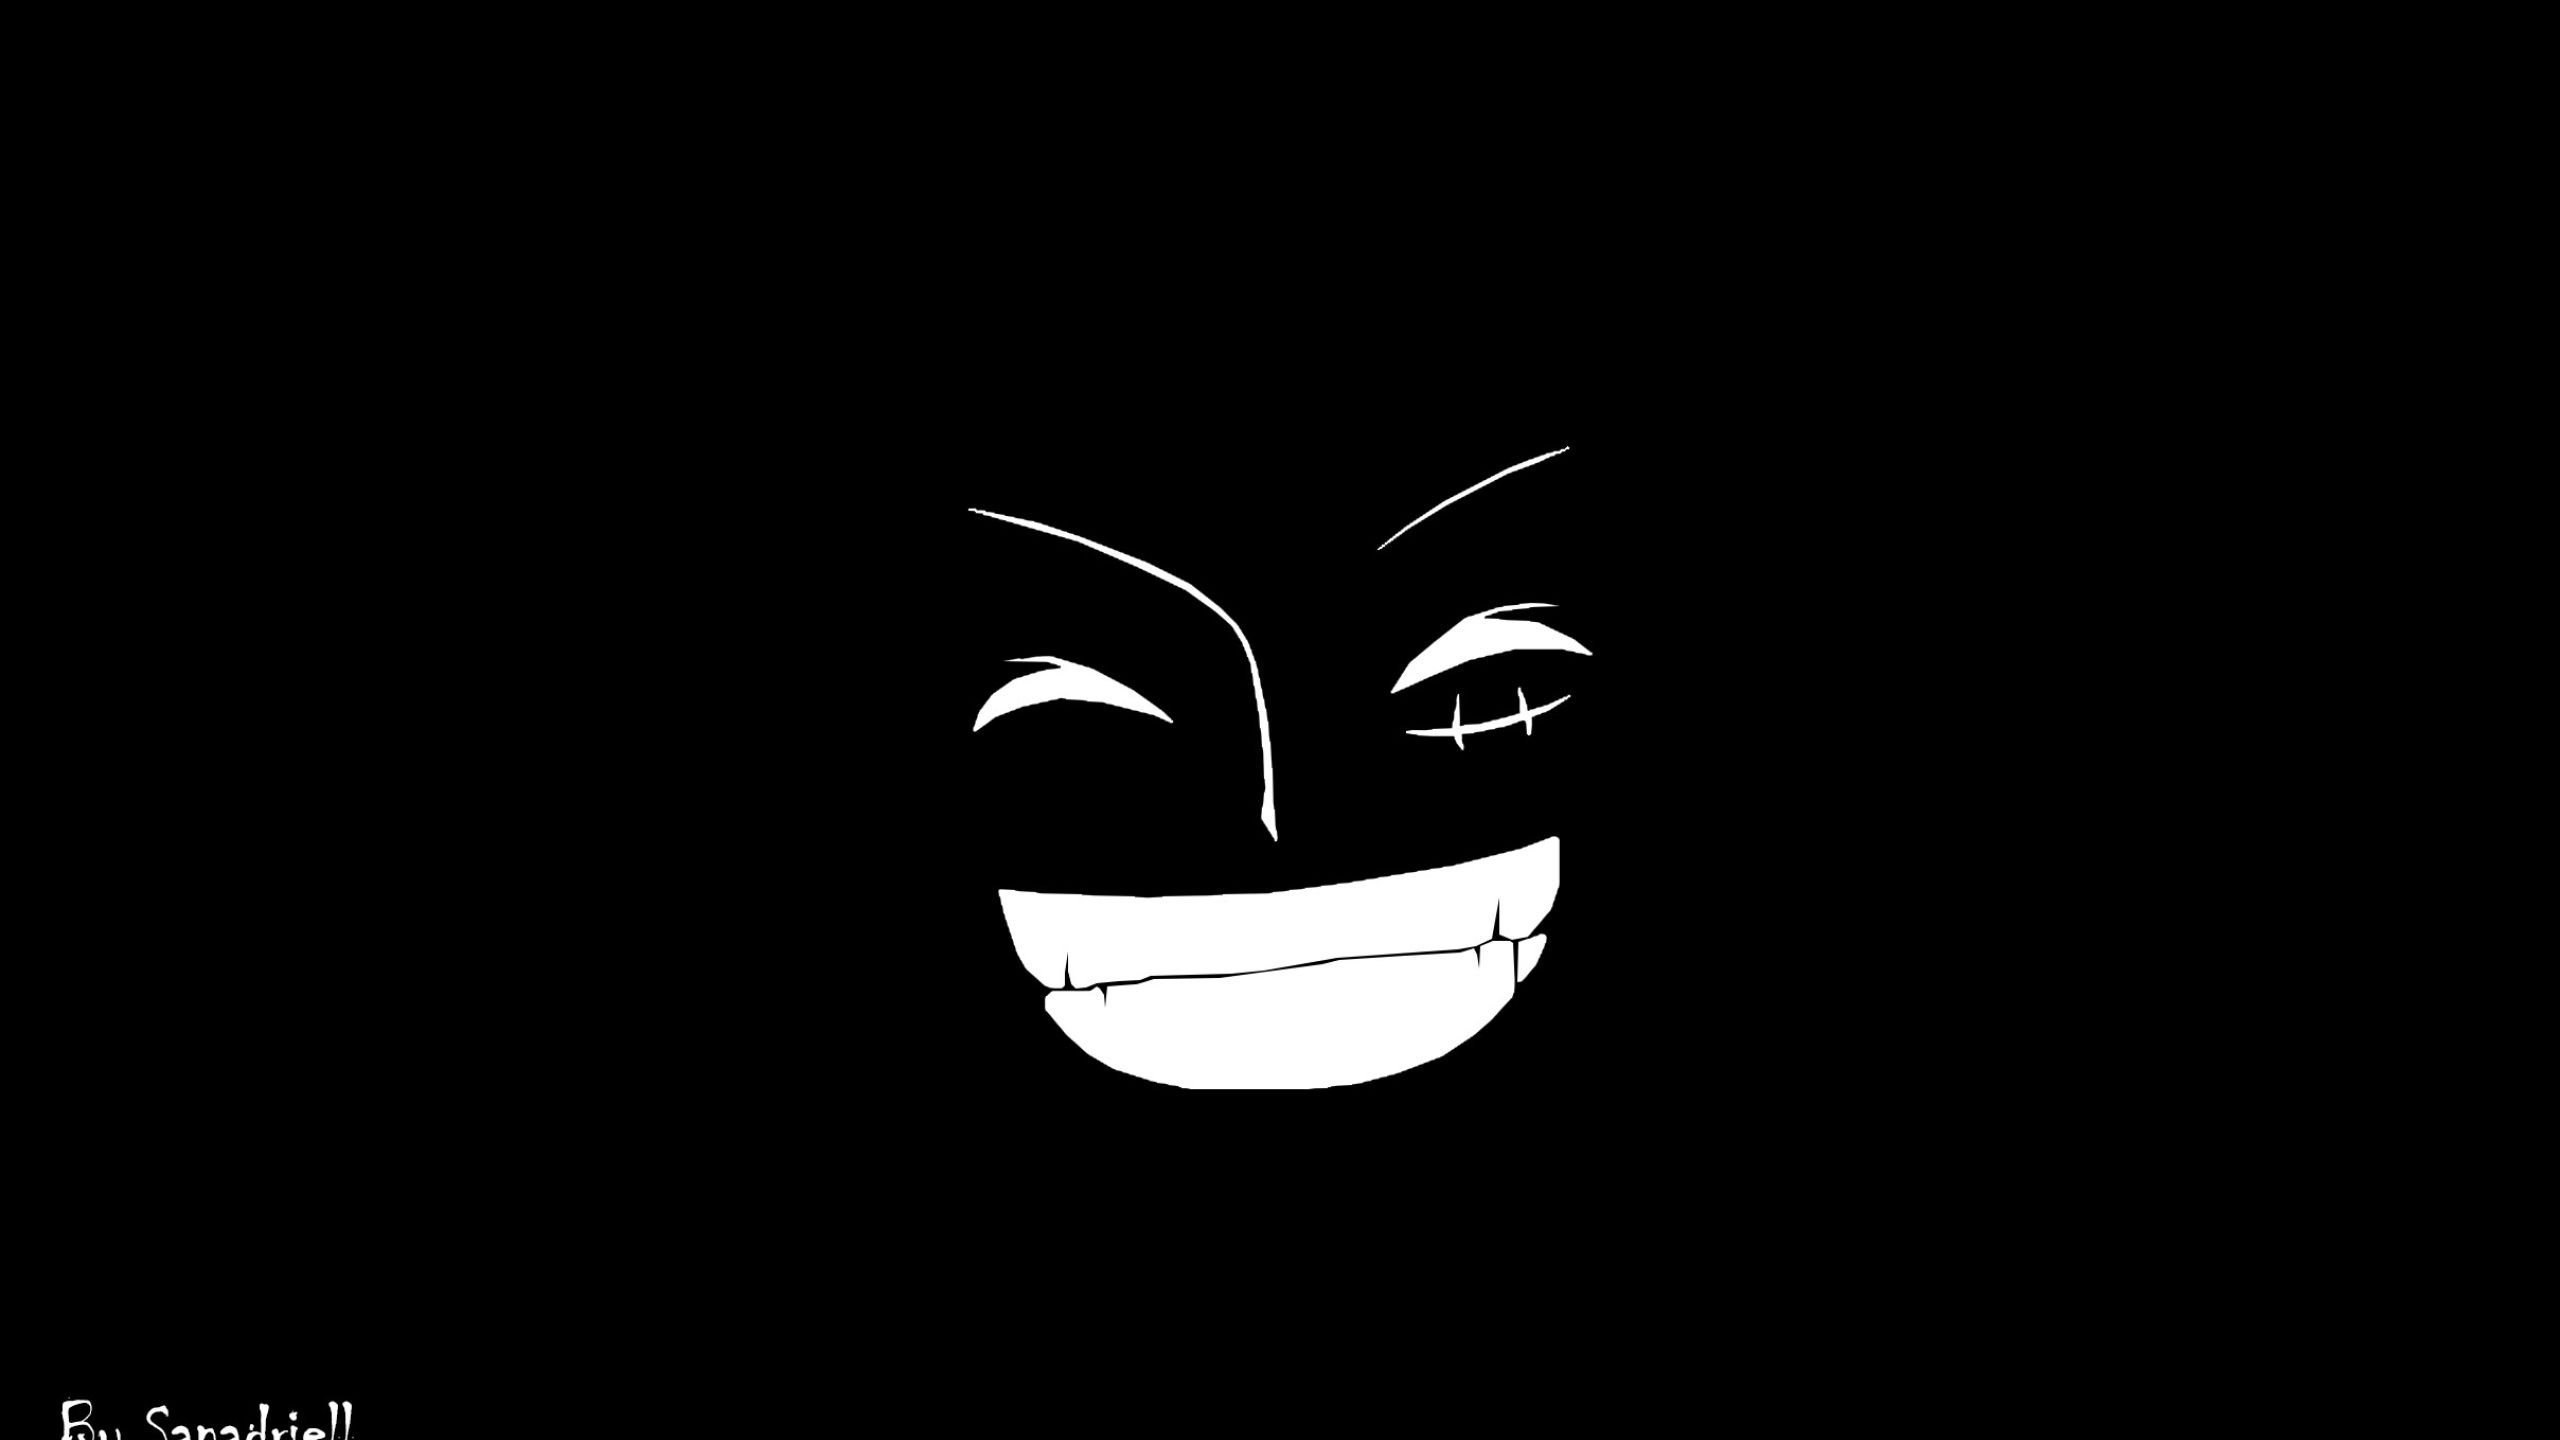 Amoled Black Smile Wallpapers - Wallpaper Cave